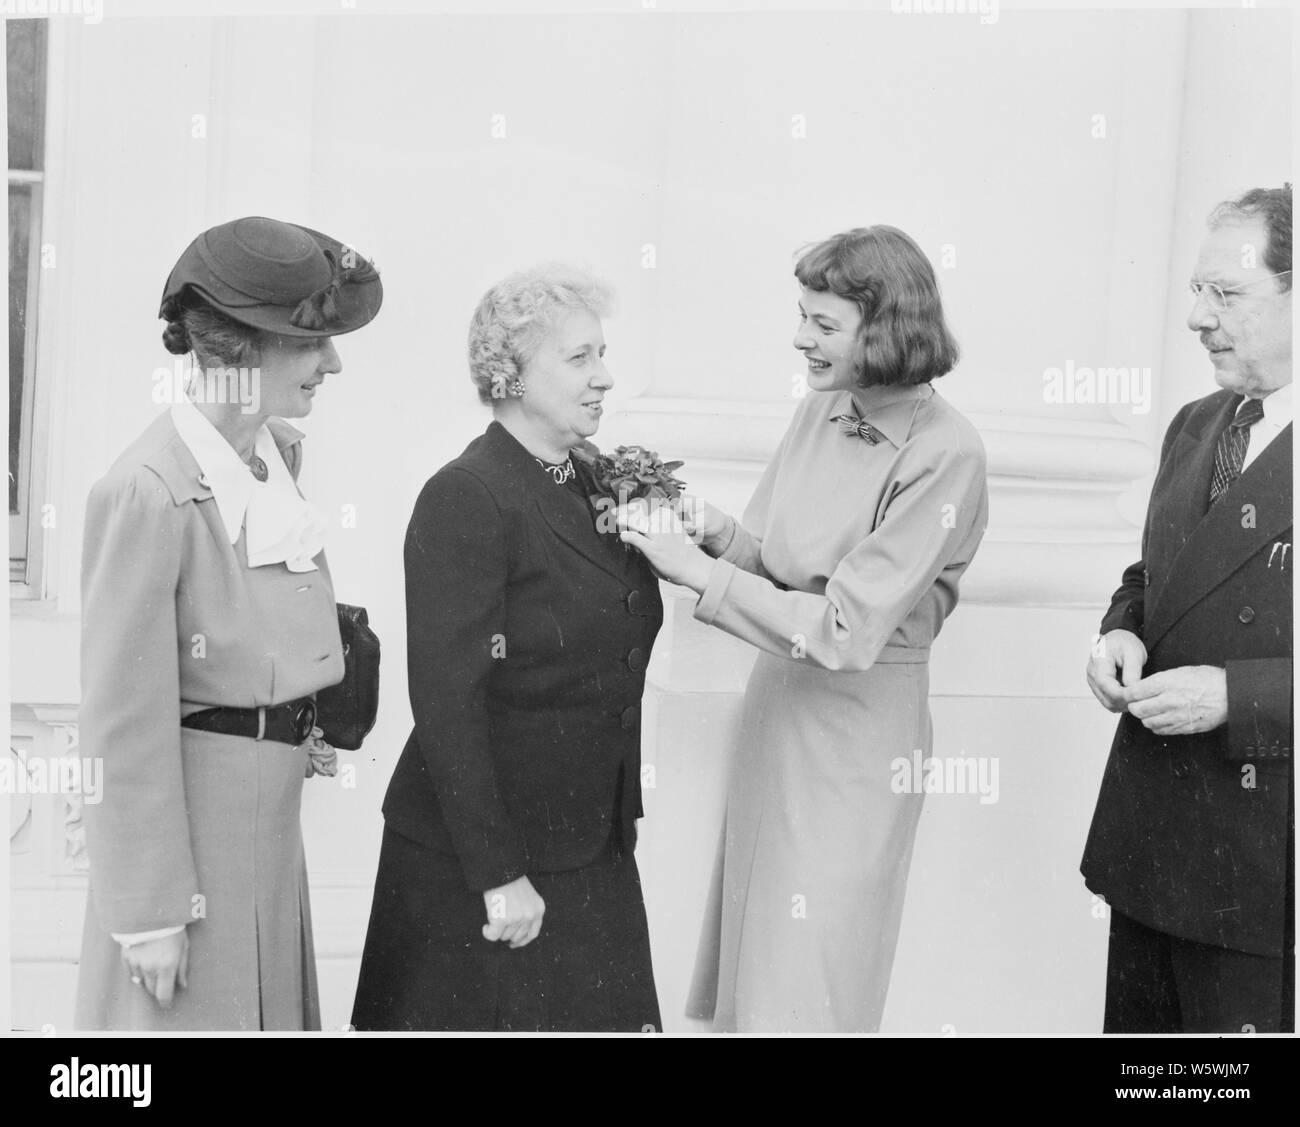 Photograph of actress Ingrid Bergman pinning a corsage on First Lady Bess Truman, who received a community chest award at the White House from a delegation including Miss Bergman, Mrs. Waldron Faulkner, Joseph Steele, and Leigh Ore. Stock Photo